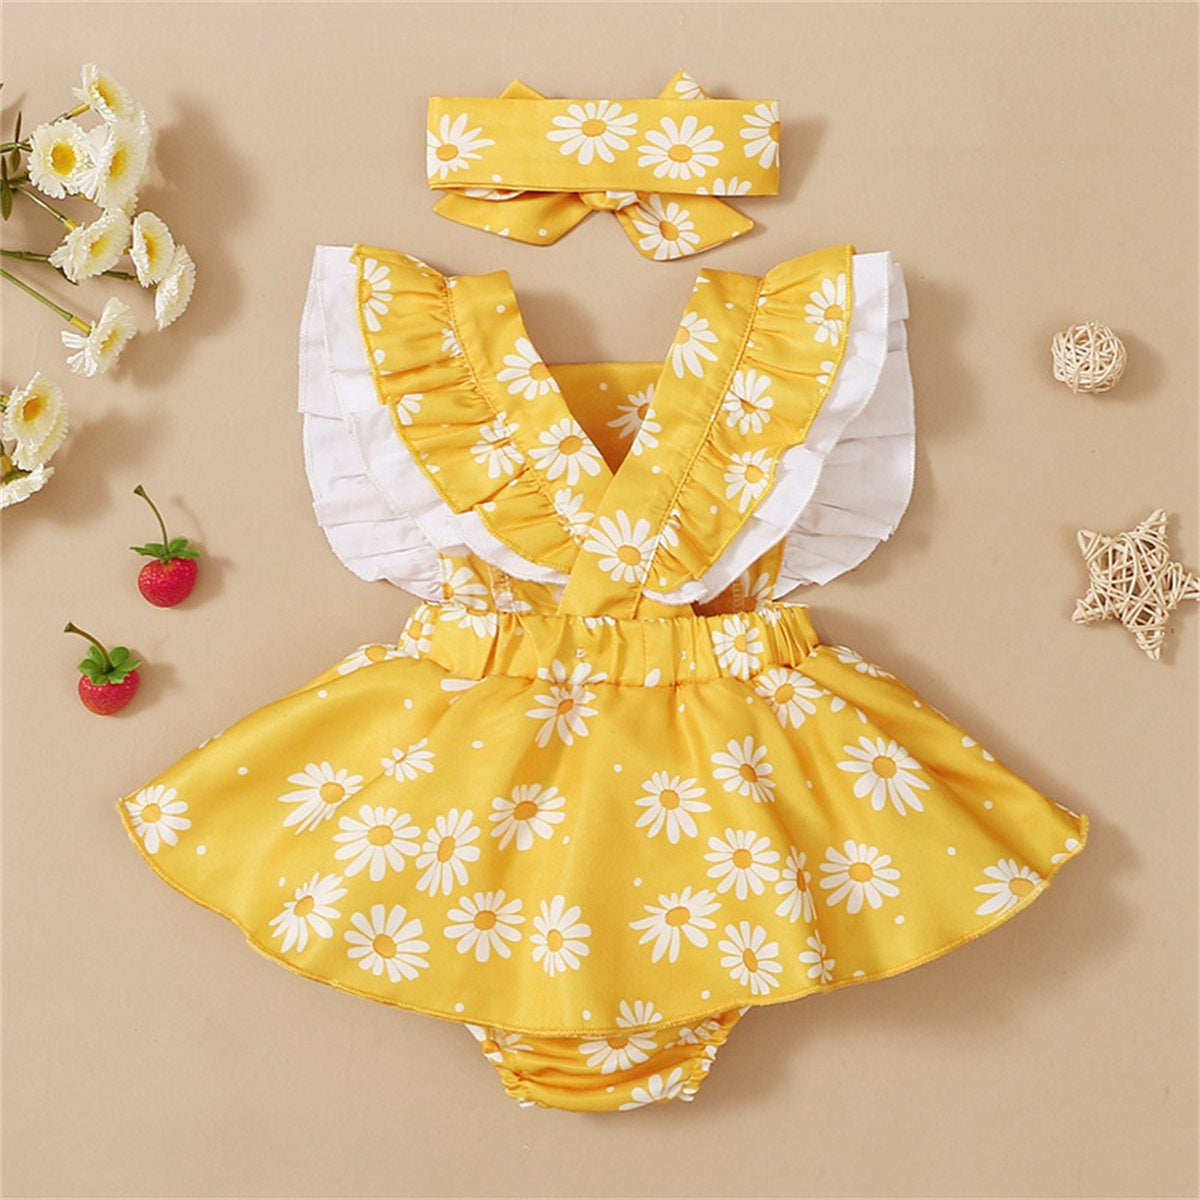 2PCS Pretty Floral Printed Sleeveless Baby Romper